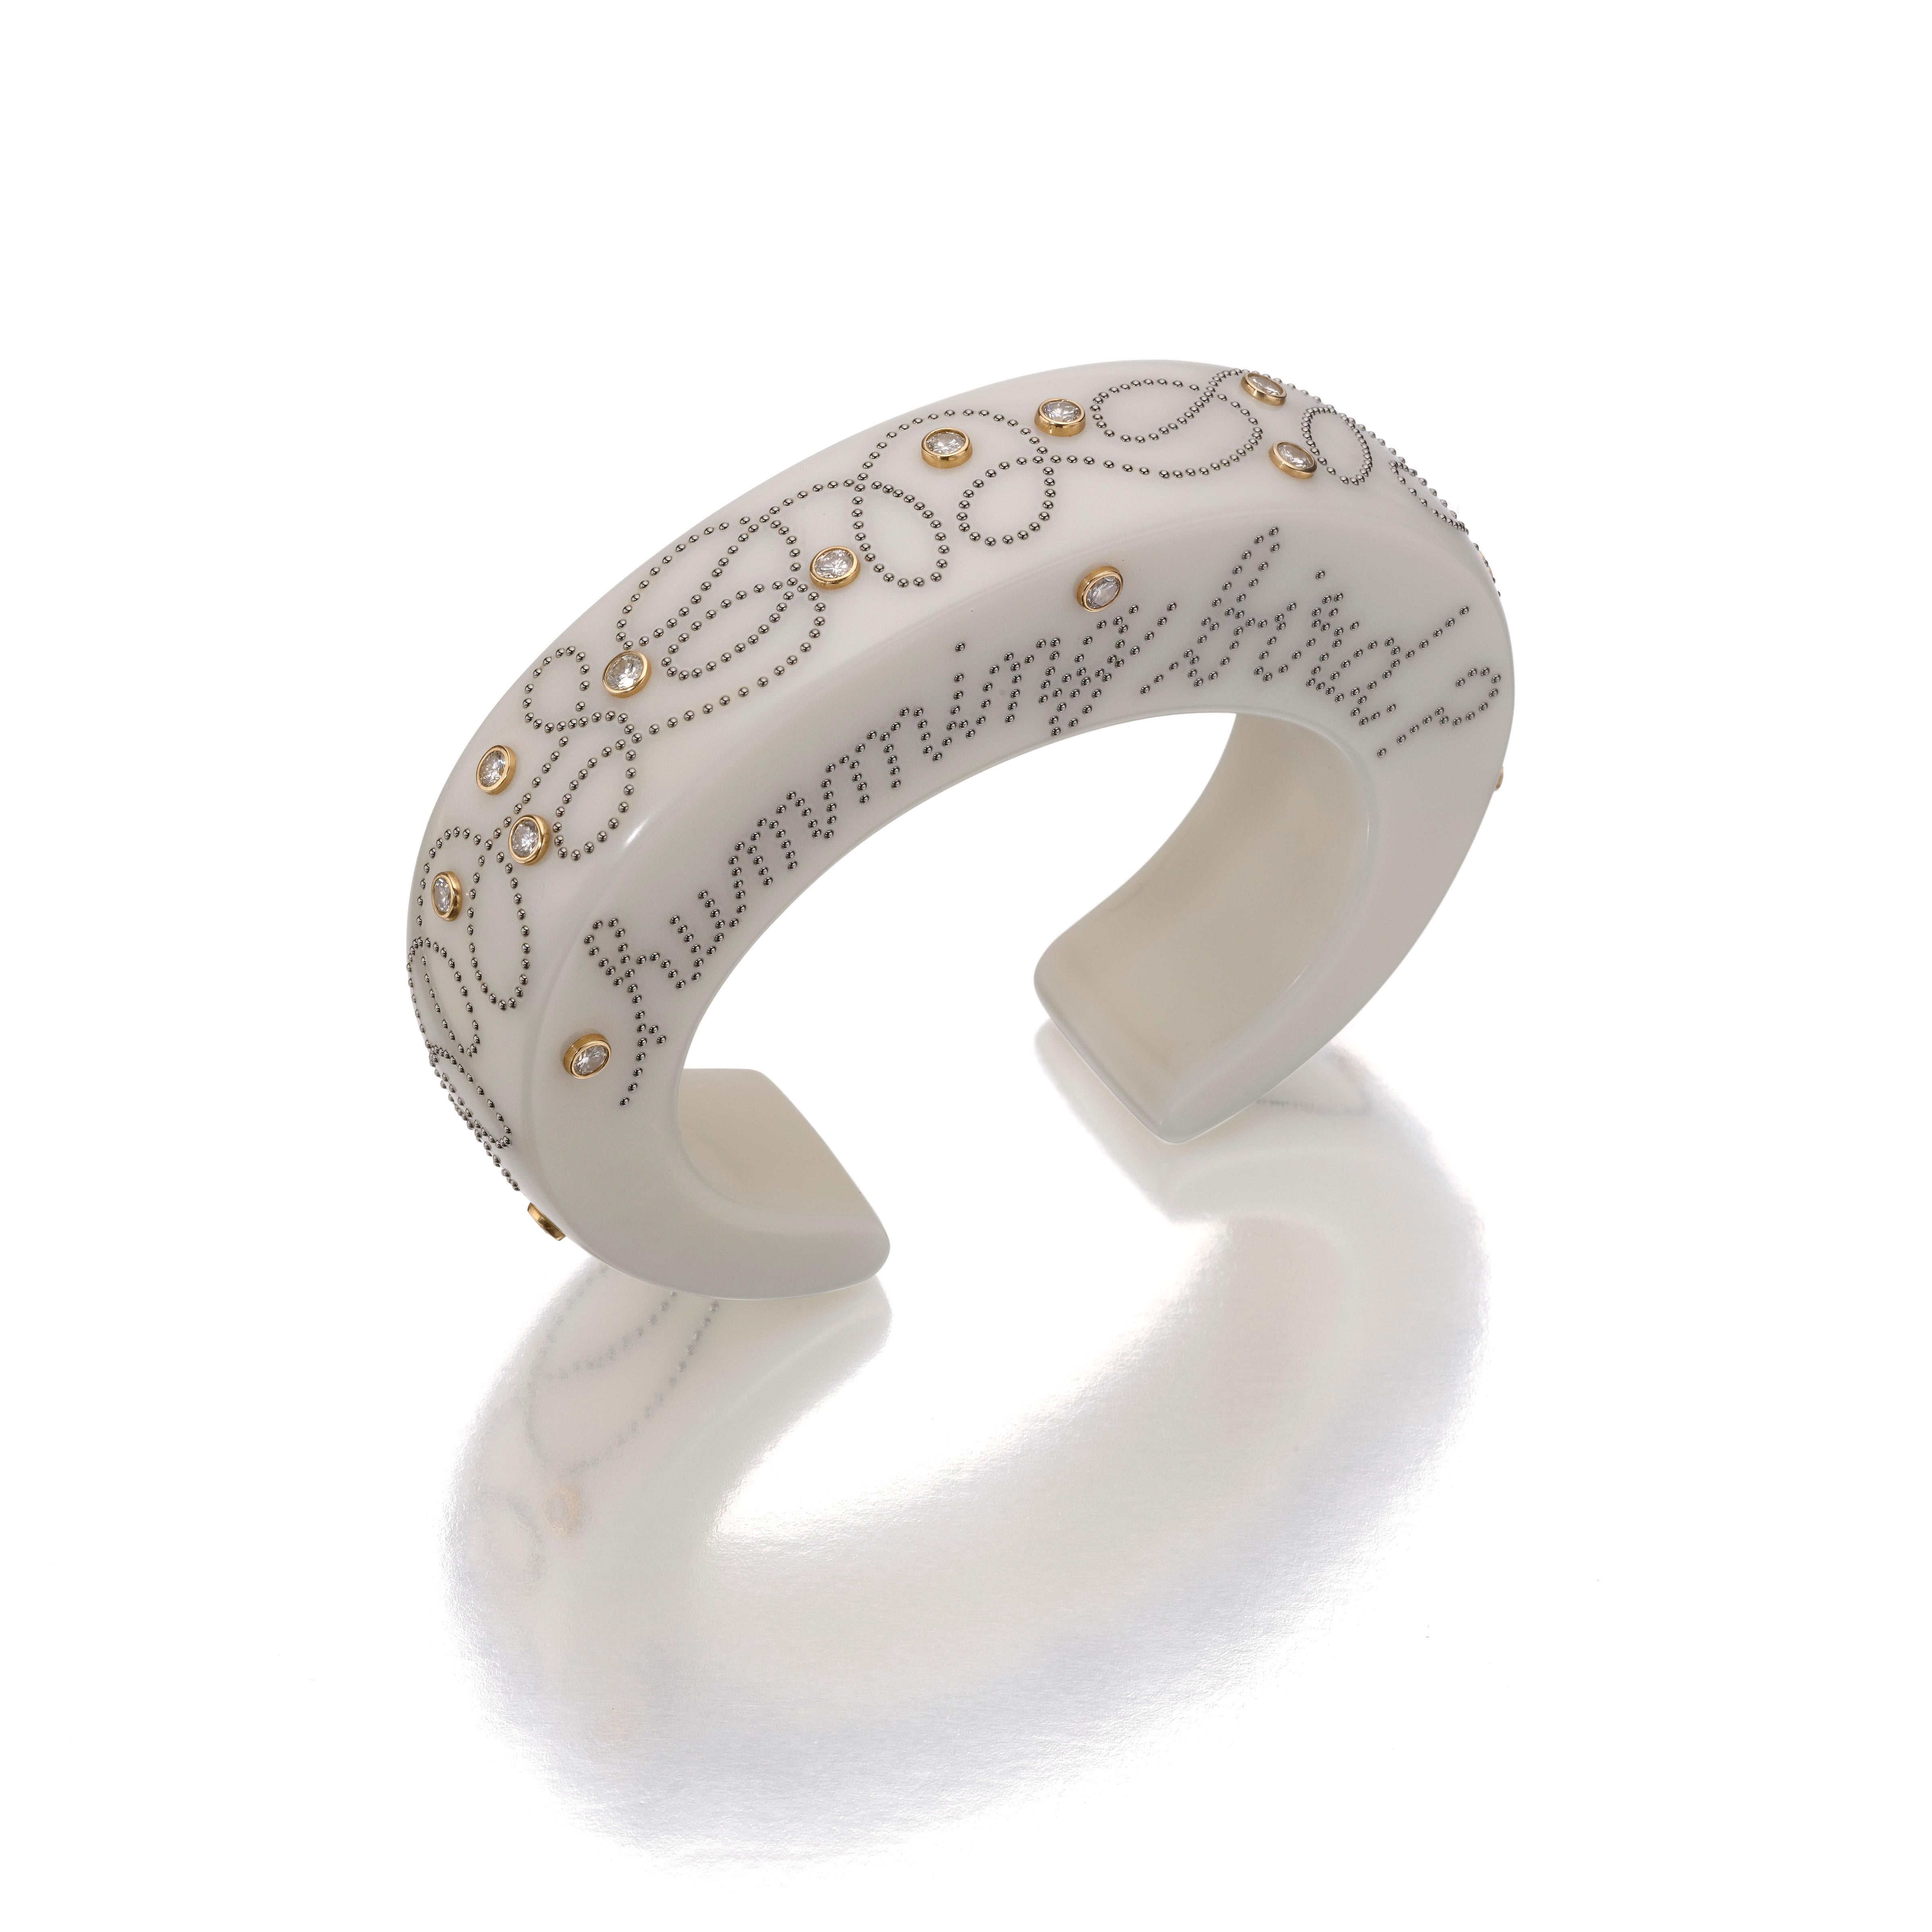 Bakelite, Steel, Gold, and Diamond Cuff Bracelet by Daniel Brush, New York, circa 2004

A carved, off-white Bakelite cuff ornamented with a granular steel inscription ”What’s the word, hummingbird?” and curling decoration, embellished with